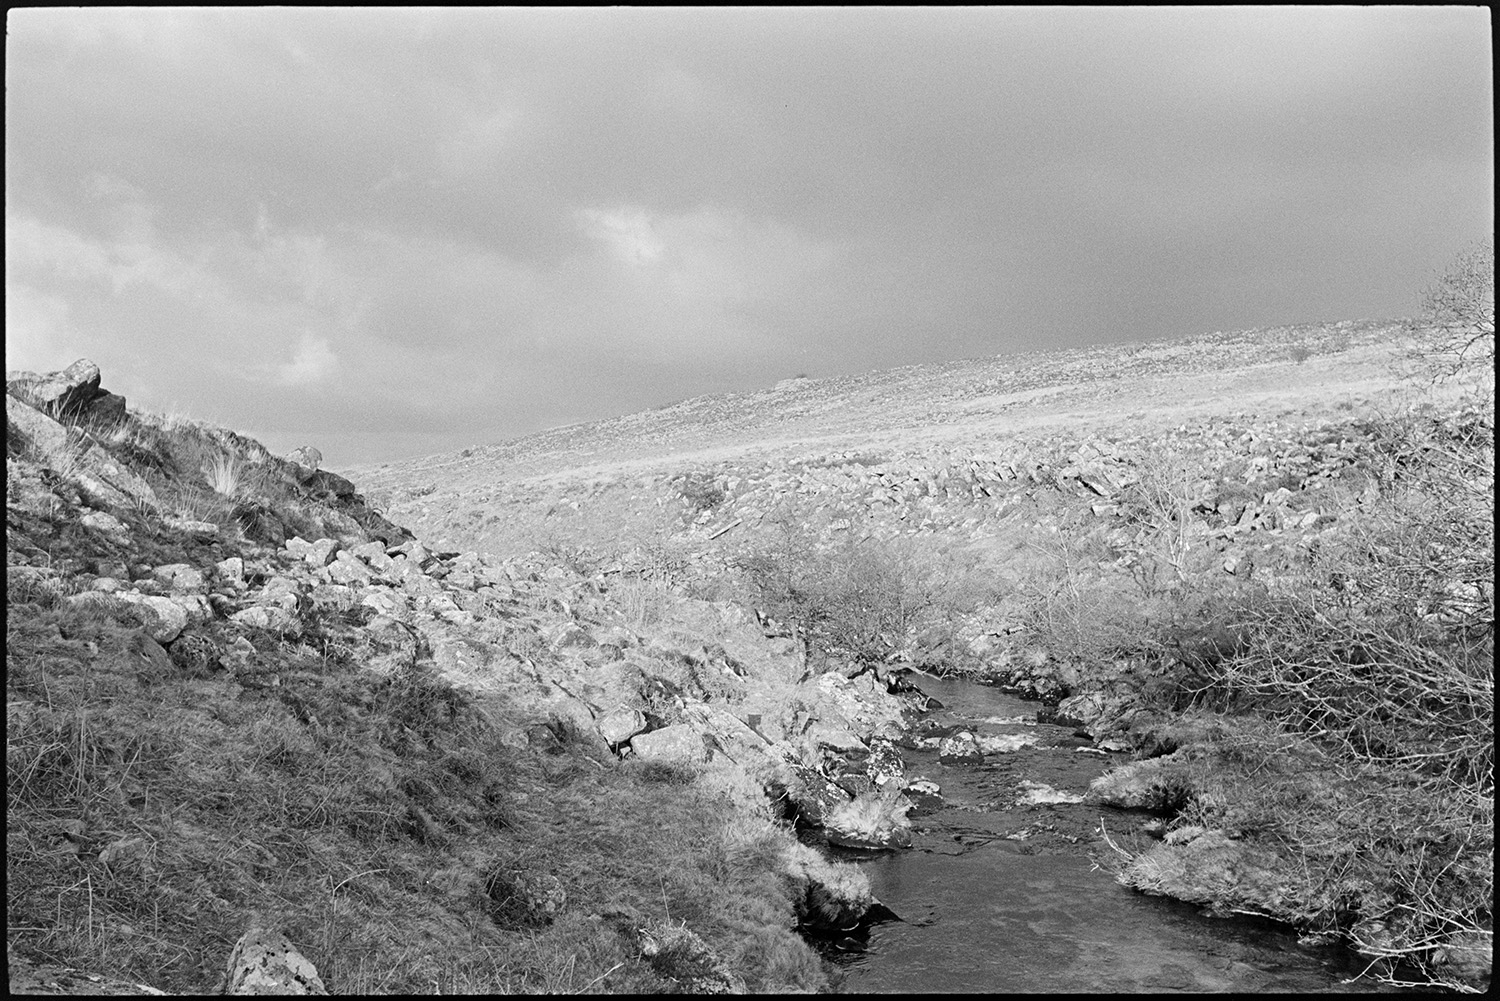 Near the source of the Taw above Belstone. Rocky stream and blasted trees.
[River Taw near its source above Belstone, Dartmoor lined with rocks in bright sunlight but with dark clouds in the sky.]